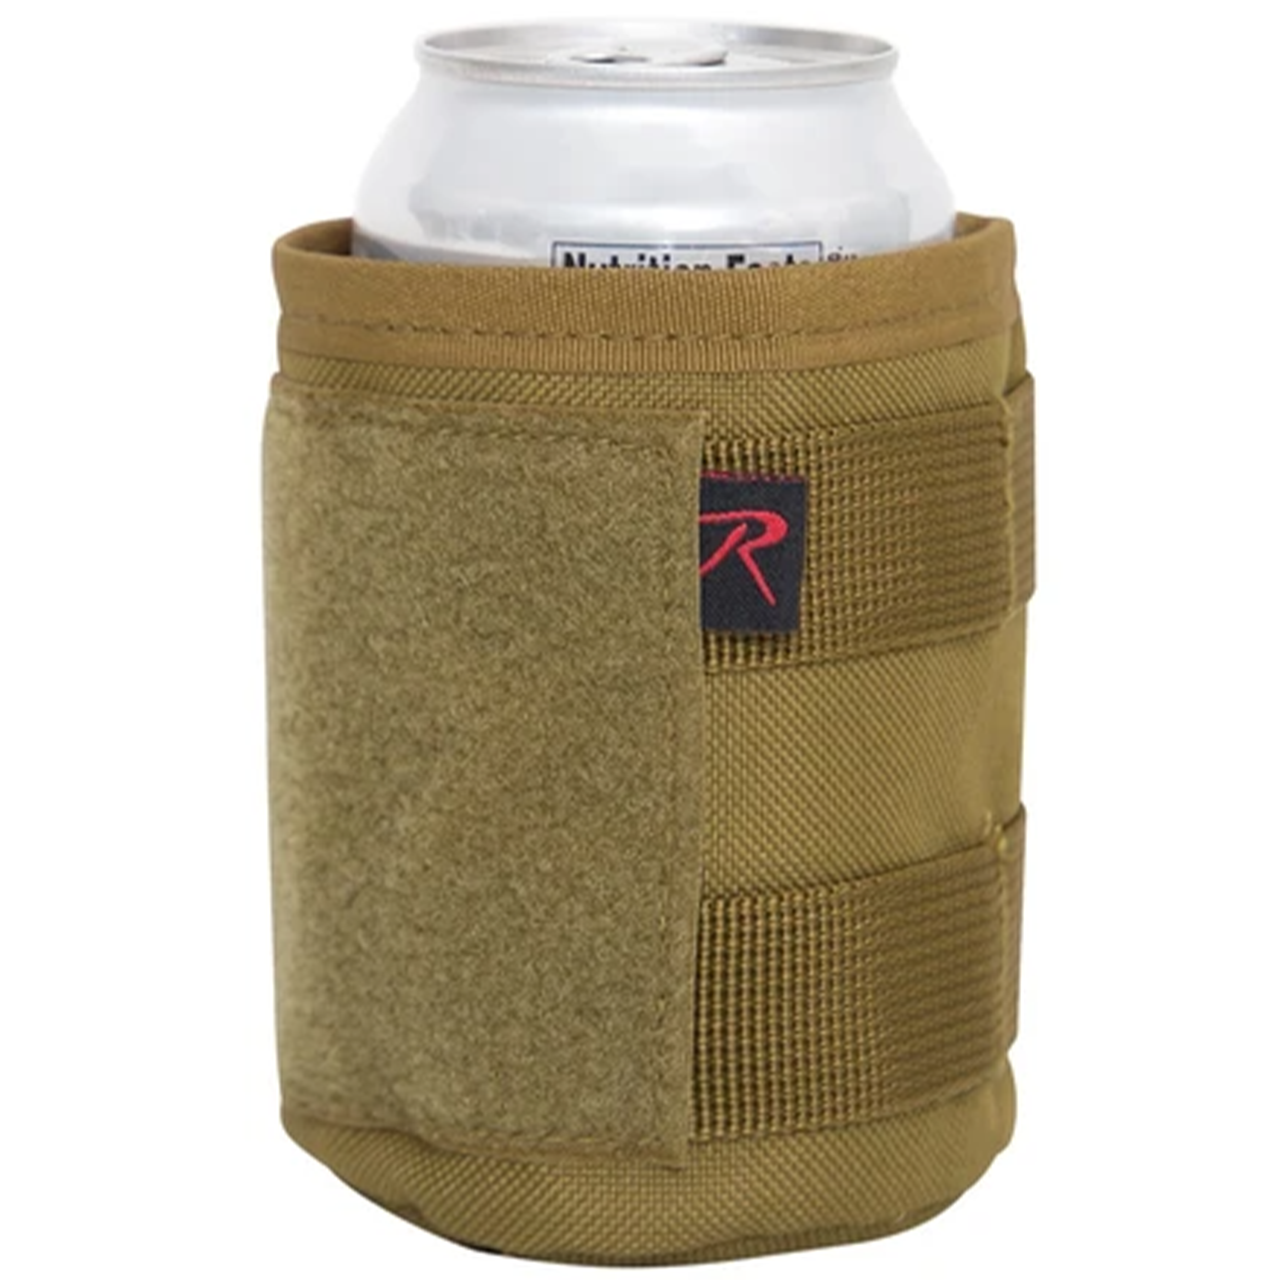 Insulated Slim Can Holders (Metal Koozies) - D.C. Firefighters